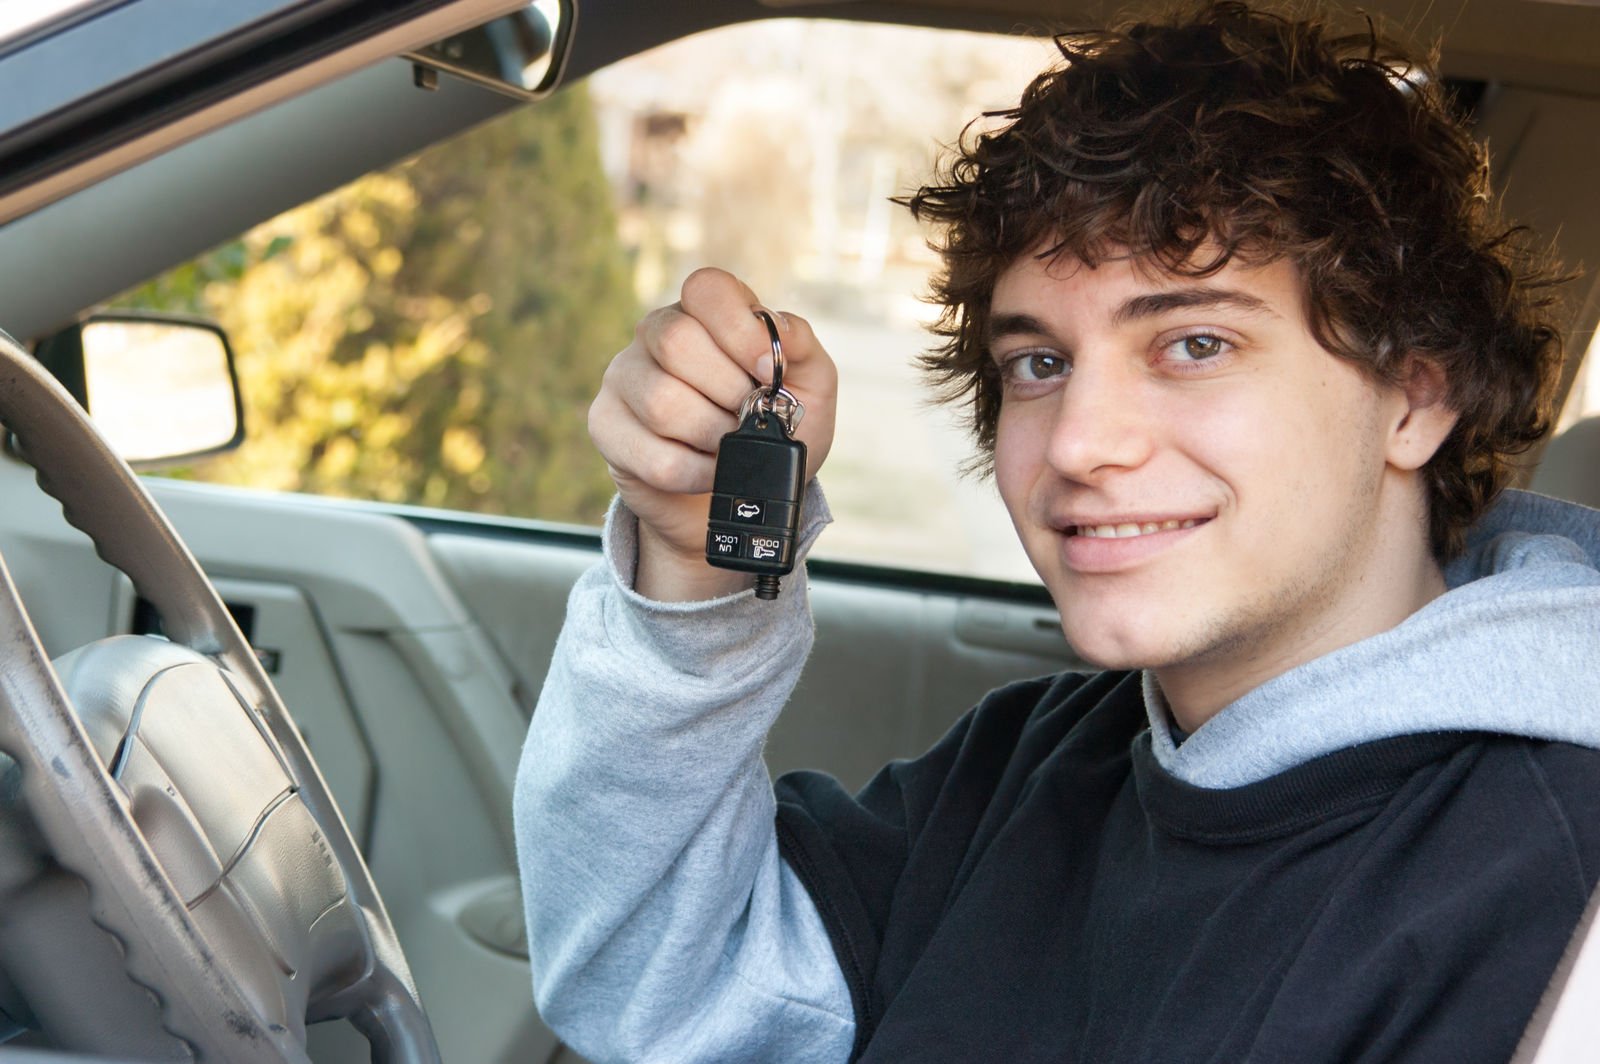 A teen boy in a car with his new keys.